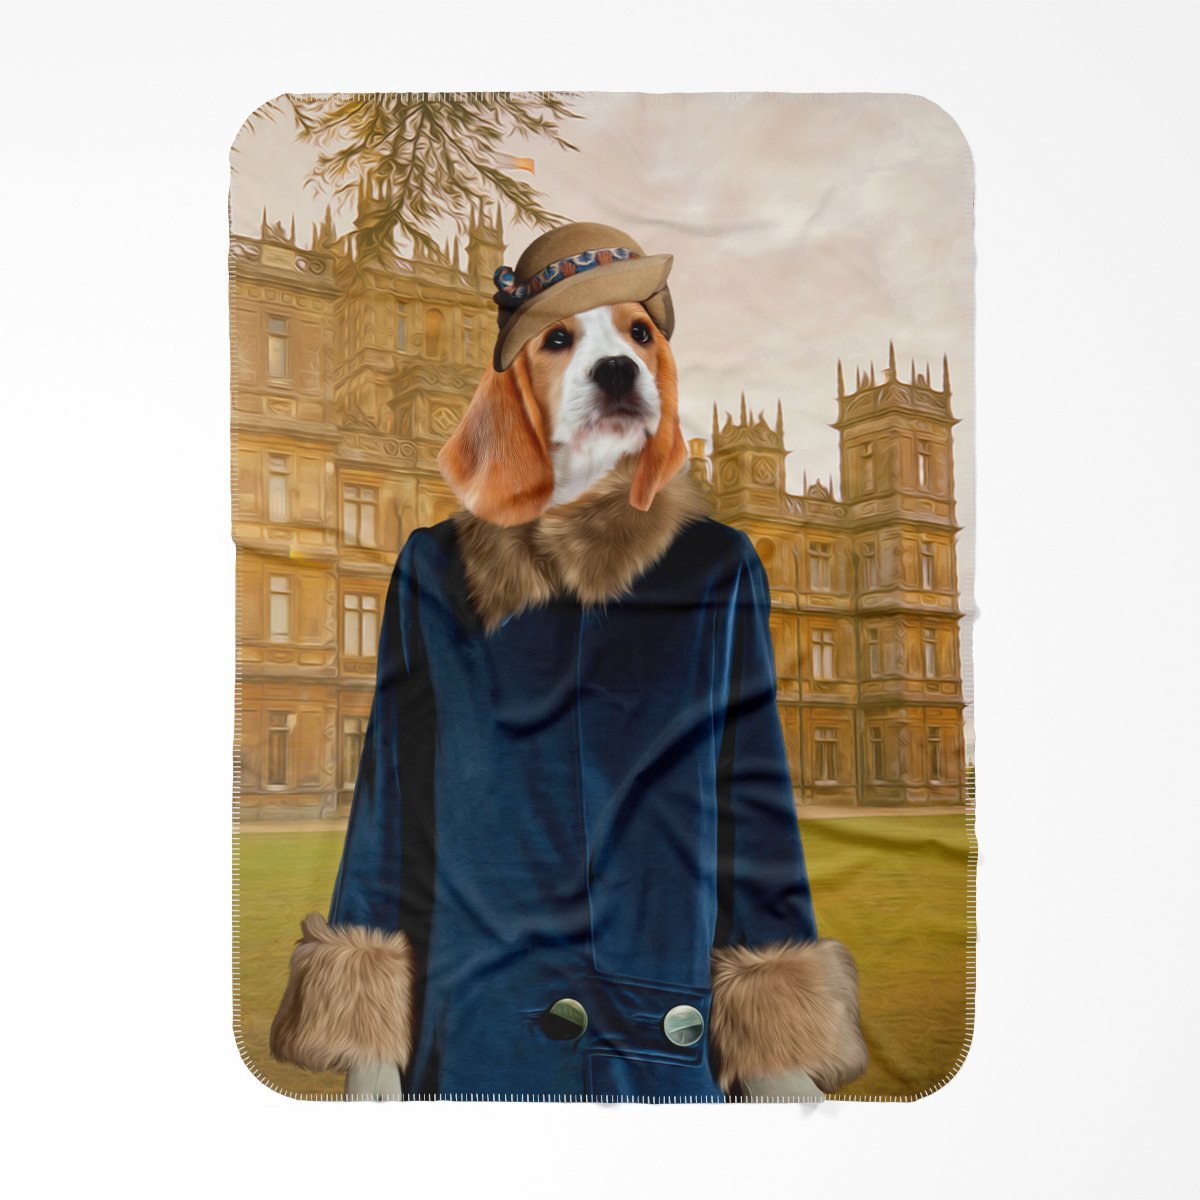 Lady Anne (Downton Abbey Inspired): Custom Pet Blanket - Paw & Glory - #pet portraits# - #dog portraits# - #pet portraits uk#,Paw and glory, Pet portraits blanket,personalized blankets for dogs, my pet on a blanket, dog printed blanket, dog face on blanket, puppy print blanket